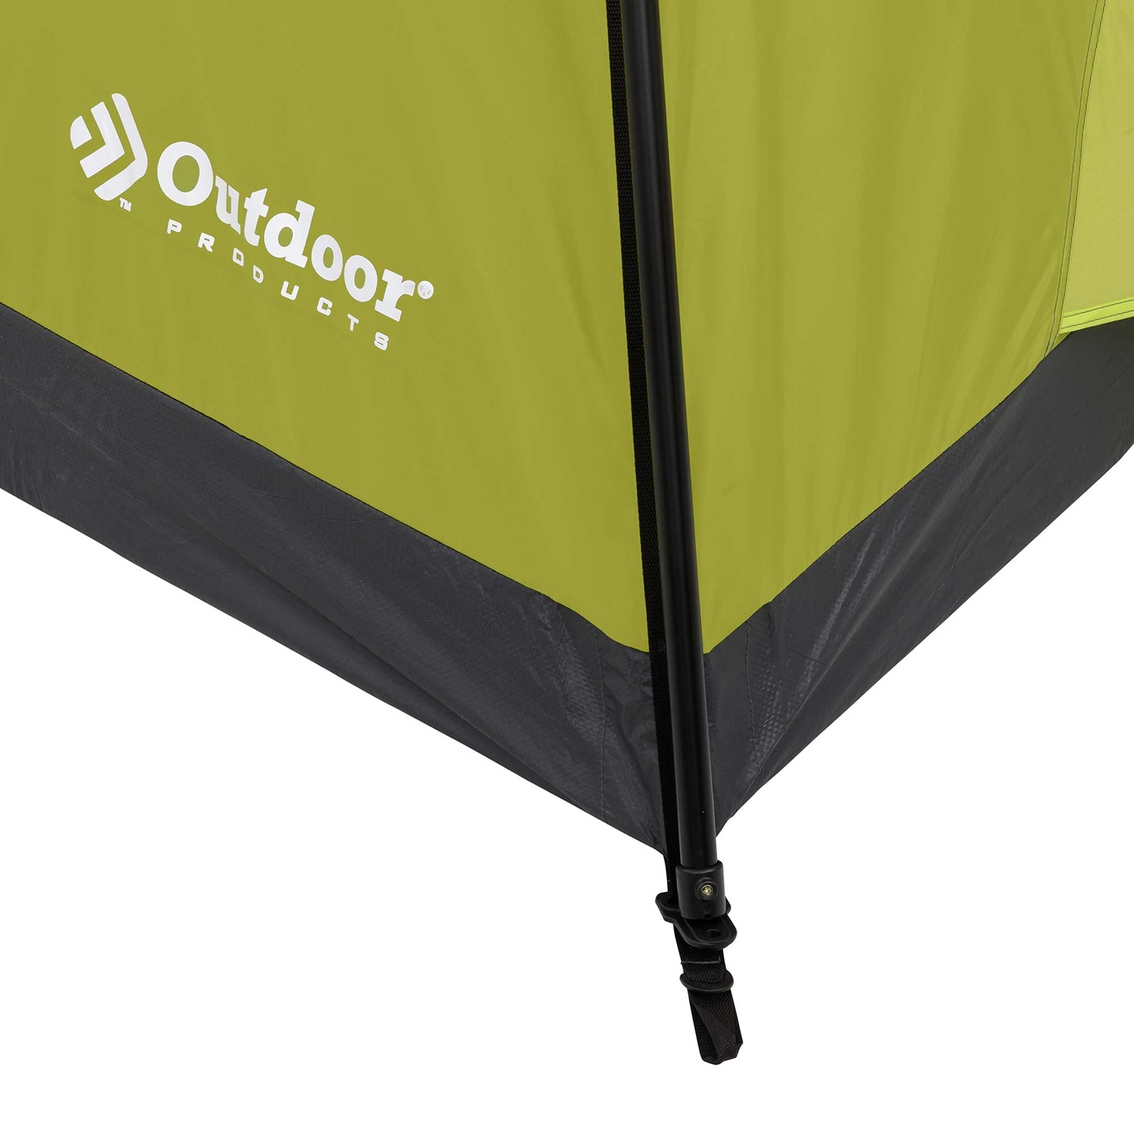 Outdoor Products 4P Instant Tent with Extended Eaves - Image 7 of 10